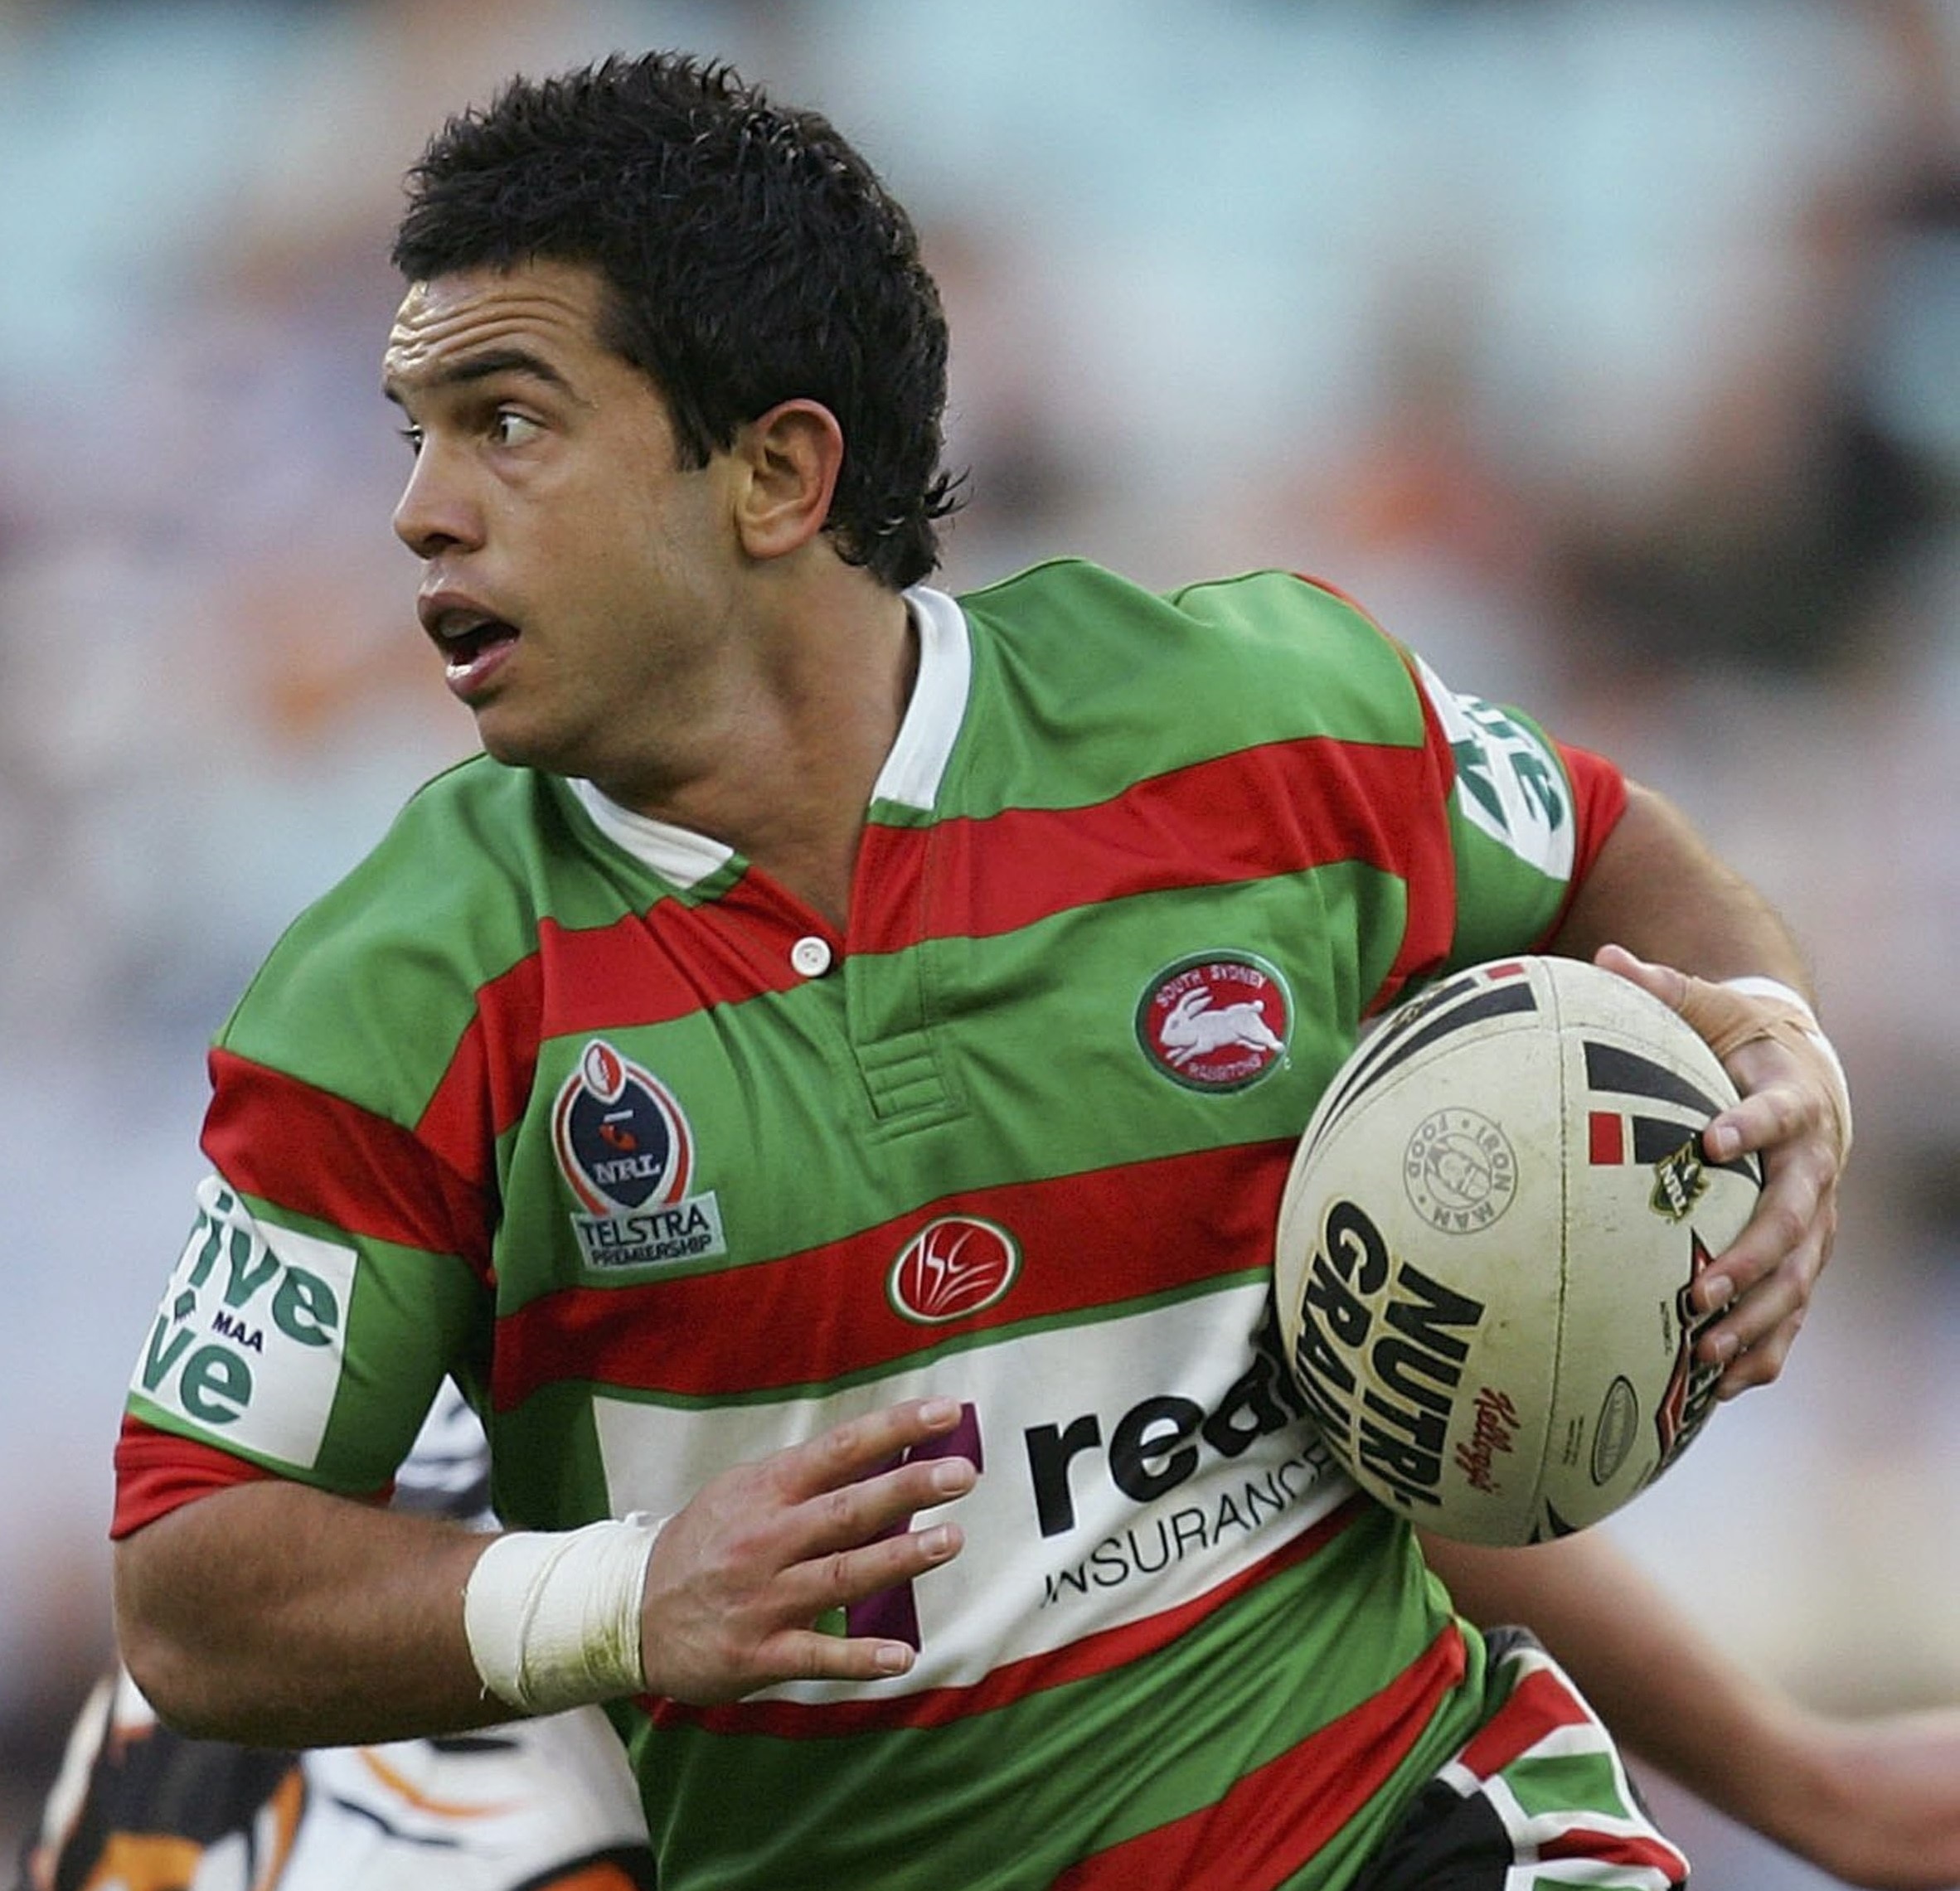 Joe Williams playing for the the Rabbitohs in 2006.